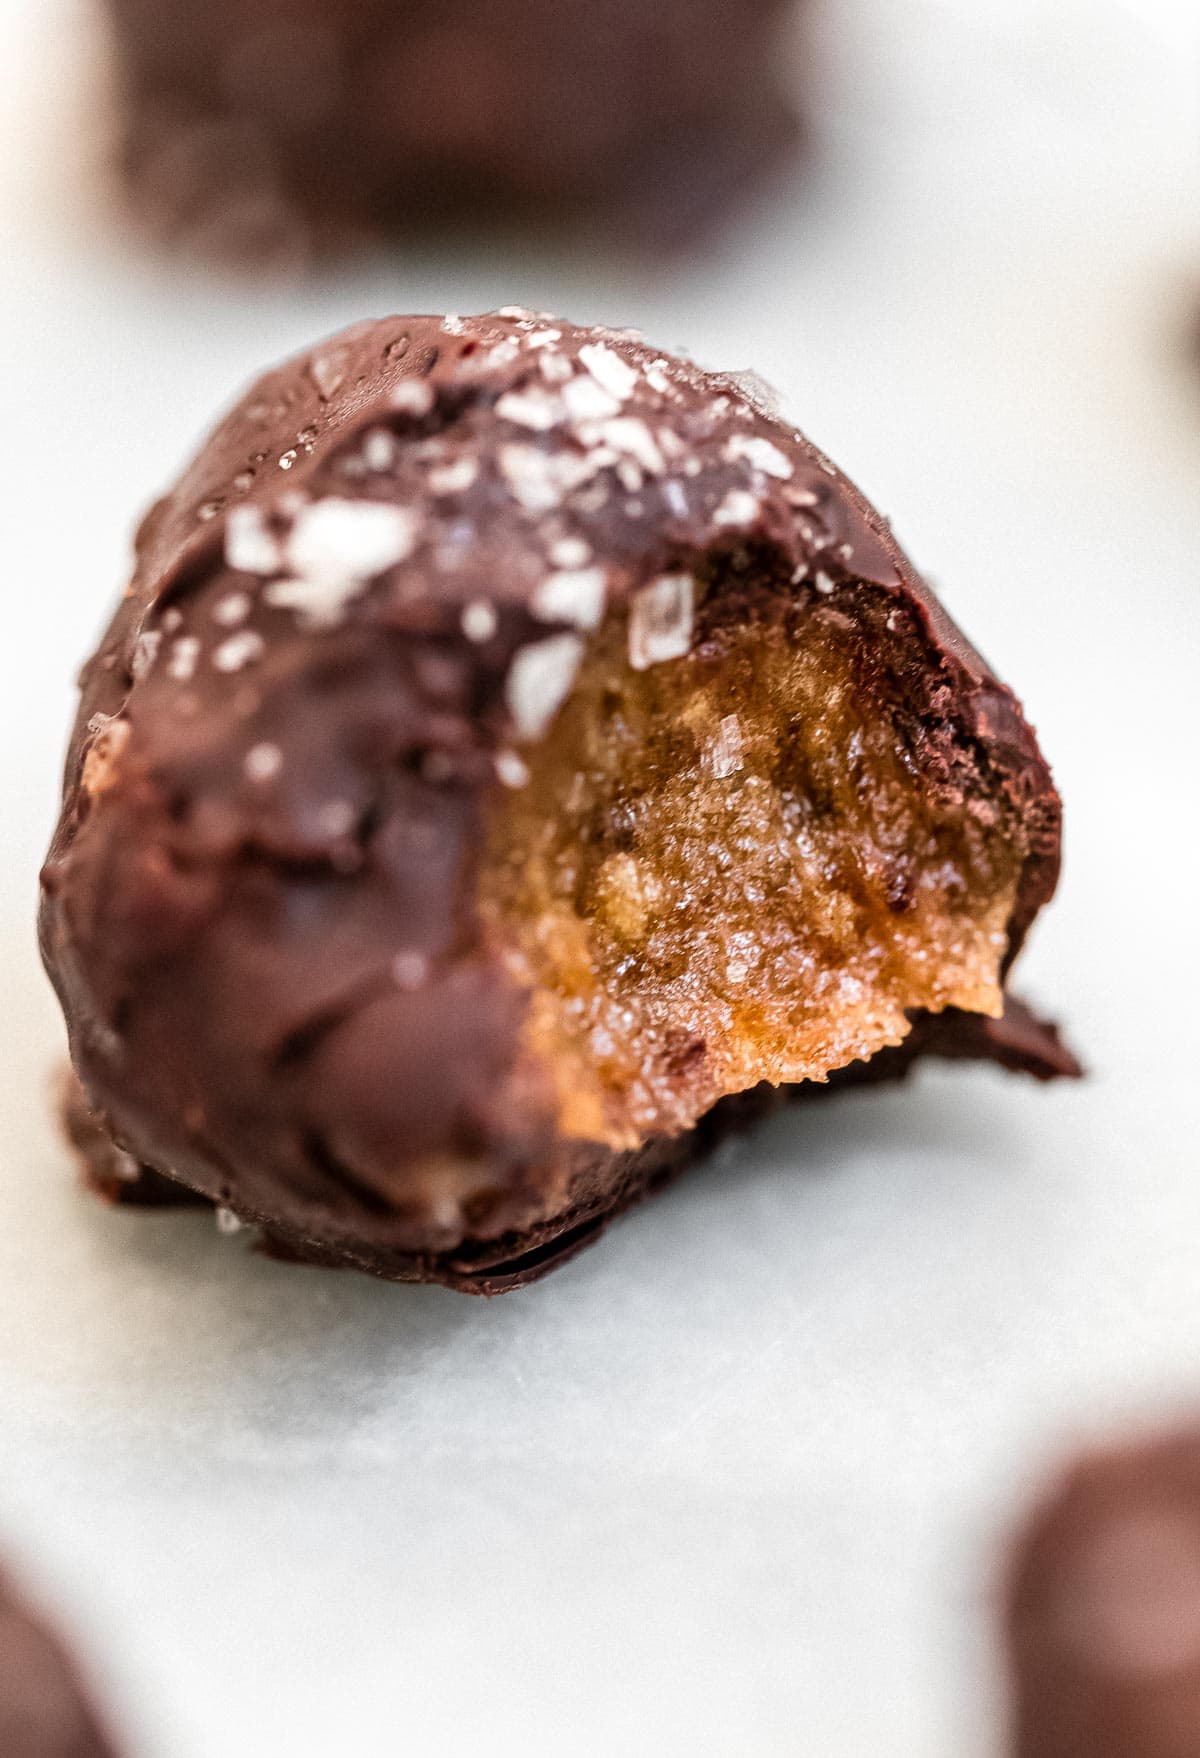 Up close image of one vegan truffle with a bite taken out.